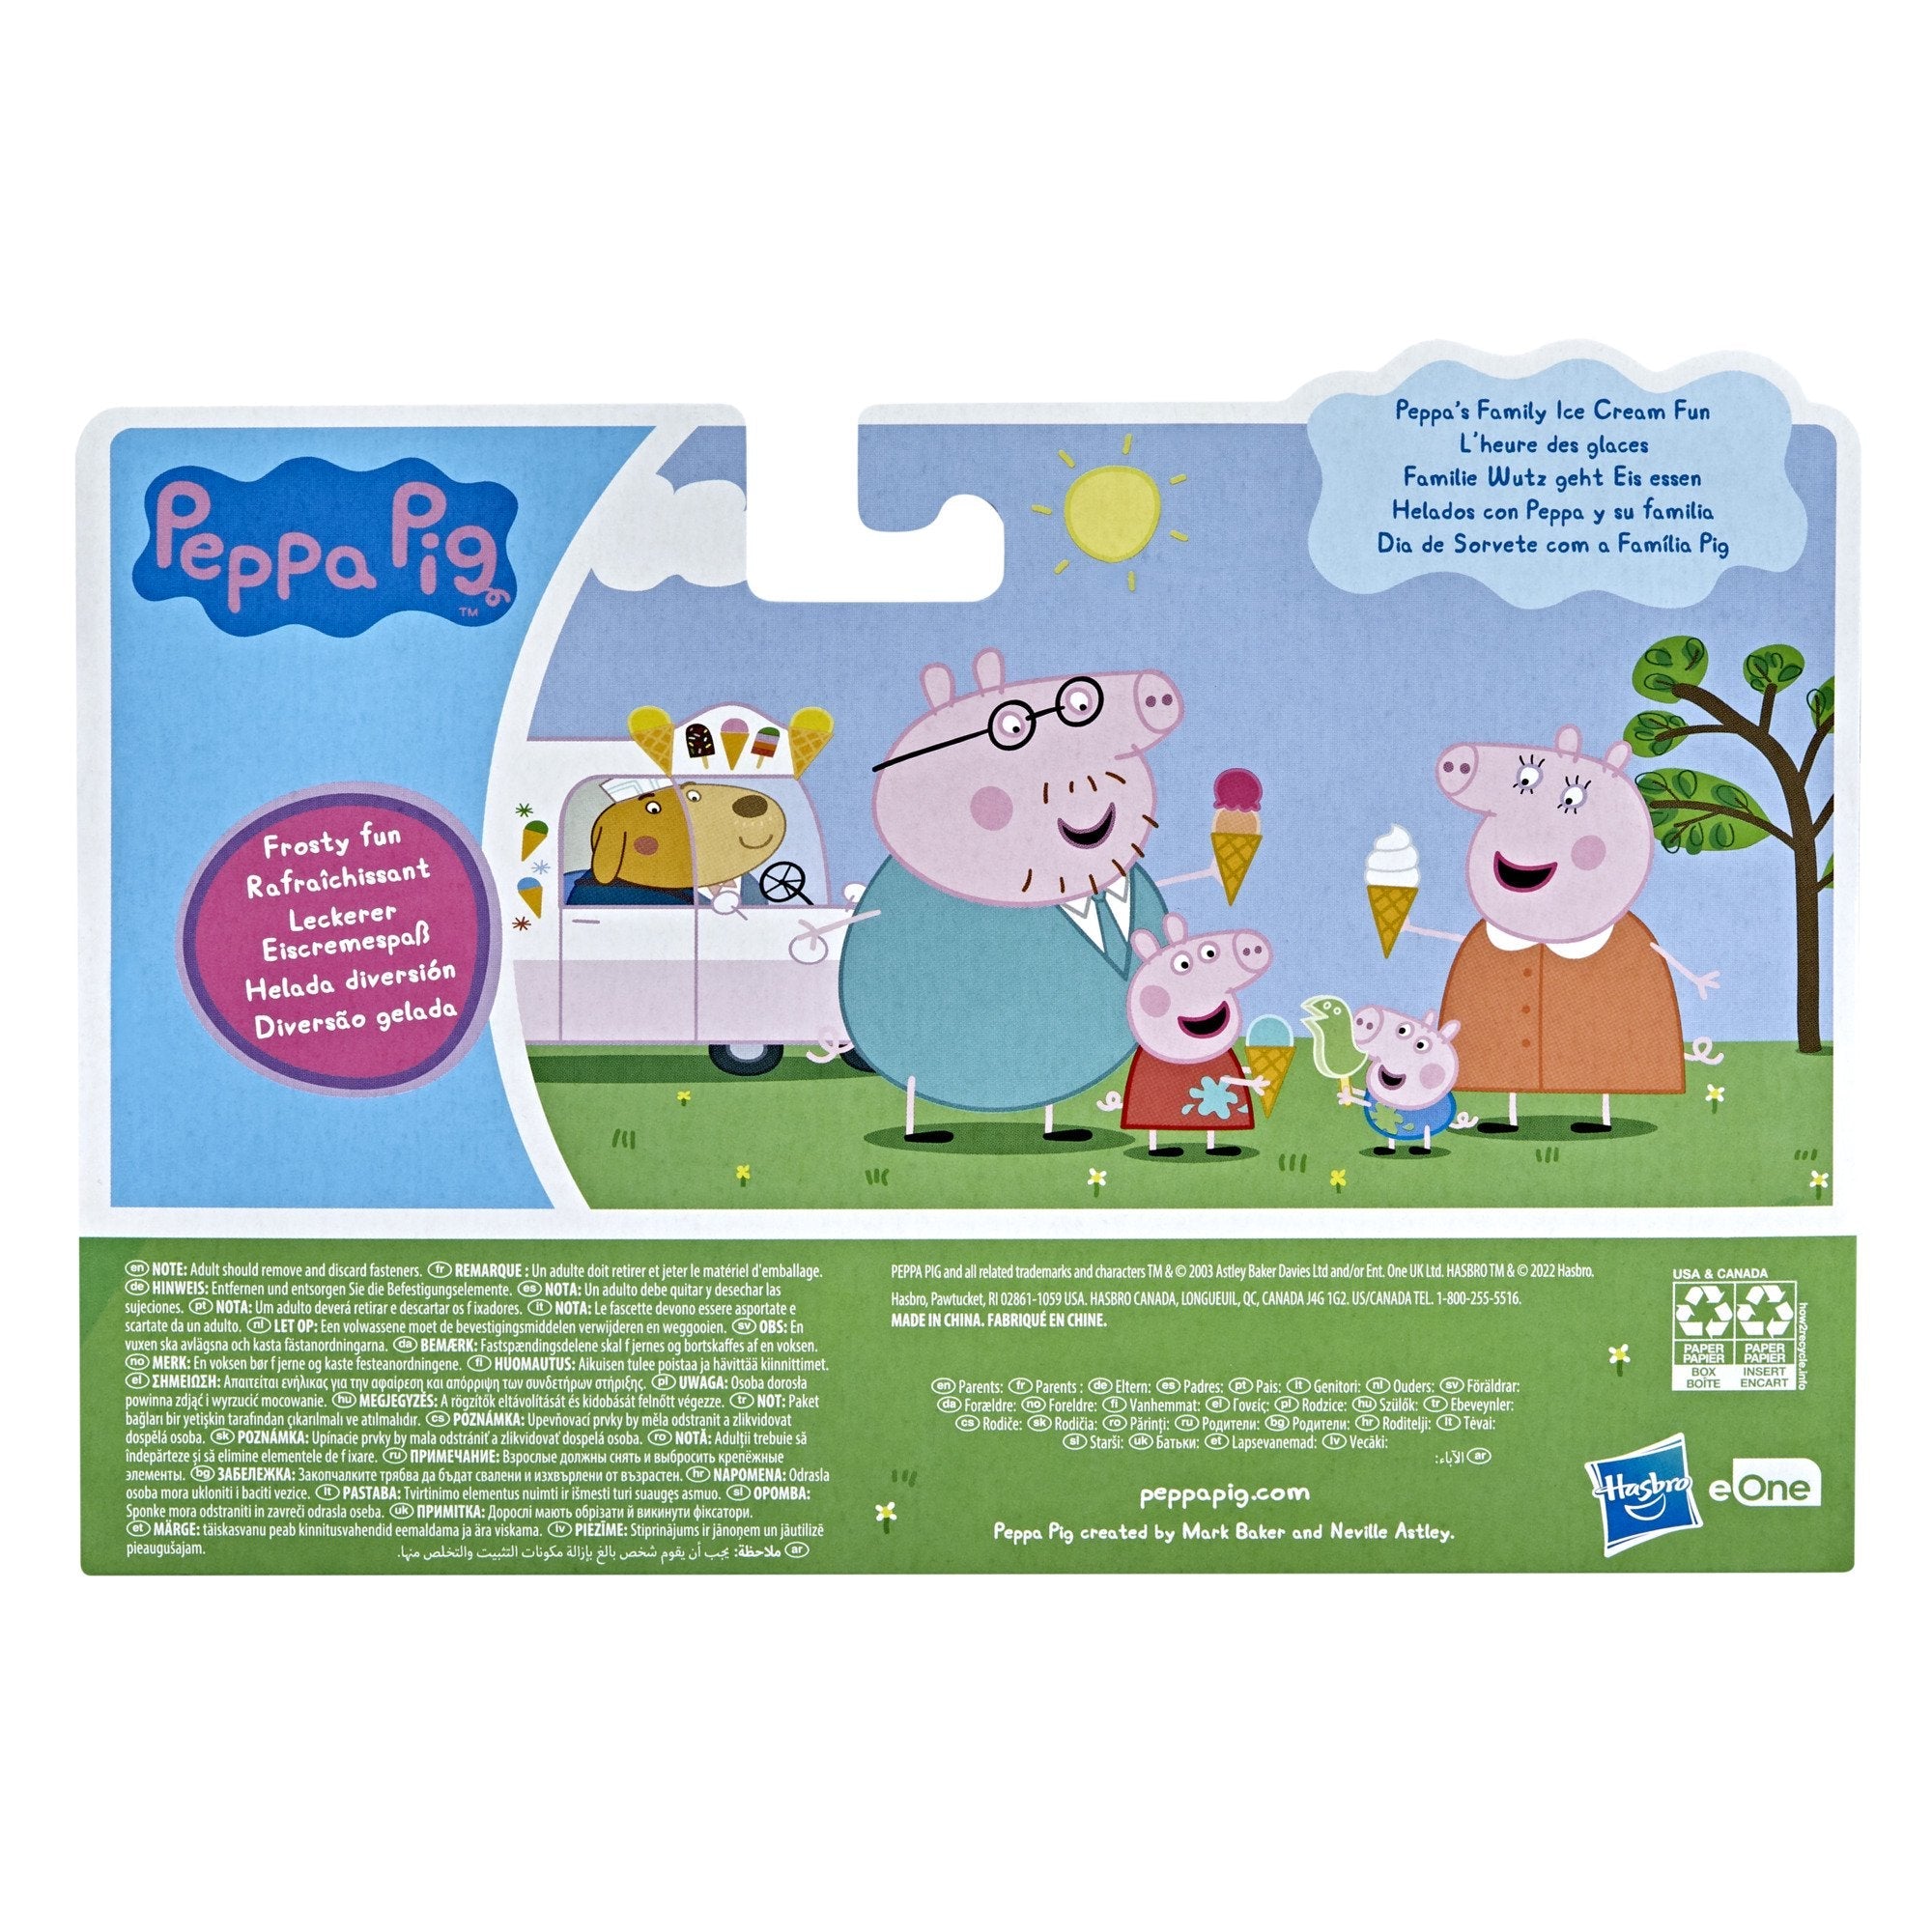 Peppa Pig Peppa's Adventures Little Boat Toy Includes 3-inch George Pig  Figure, Inspired by The TV Show, for Preschoolers Ages 3 and Up